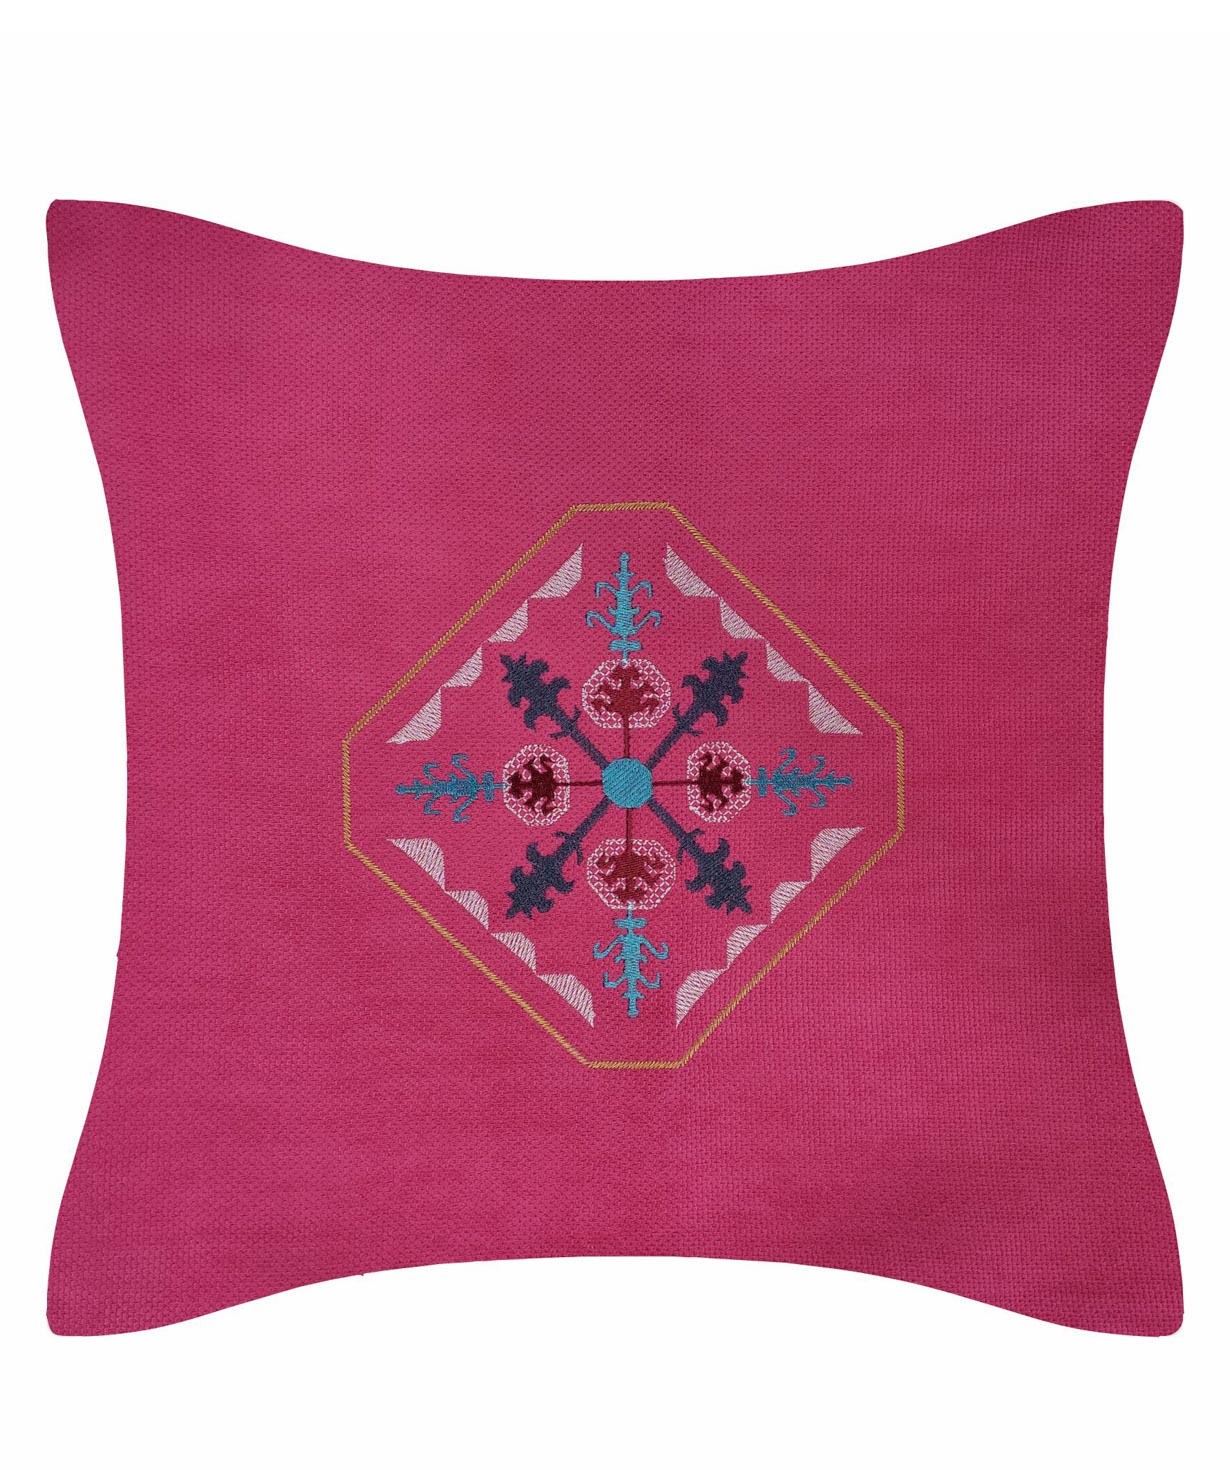 Pillow `Miskaryan heritage` embroidered with Armenian ornament №35